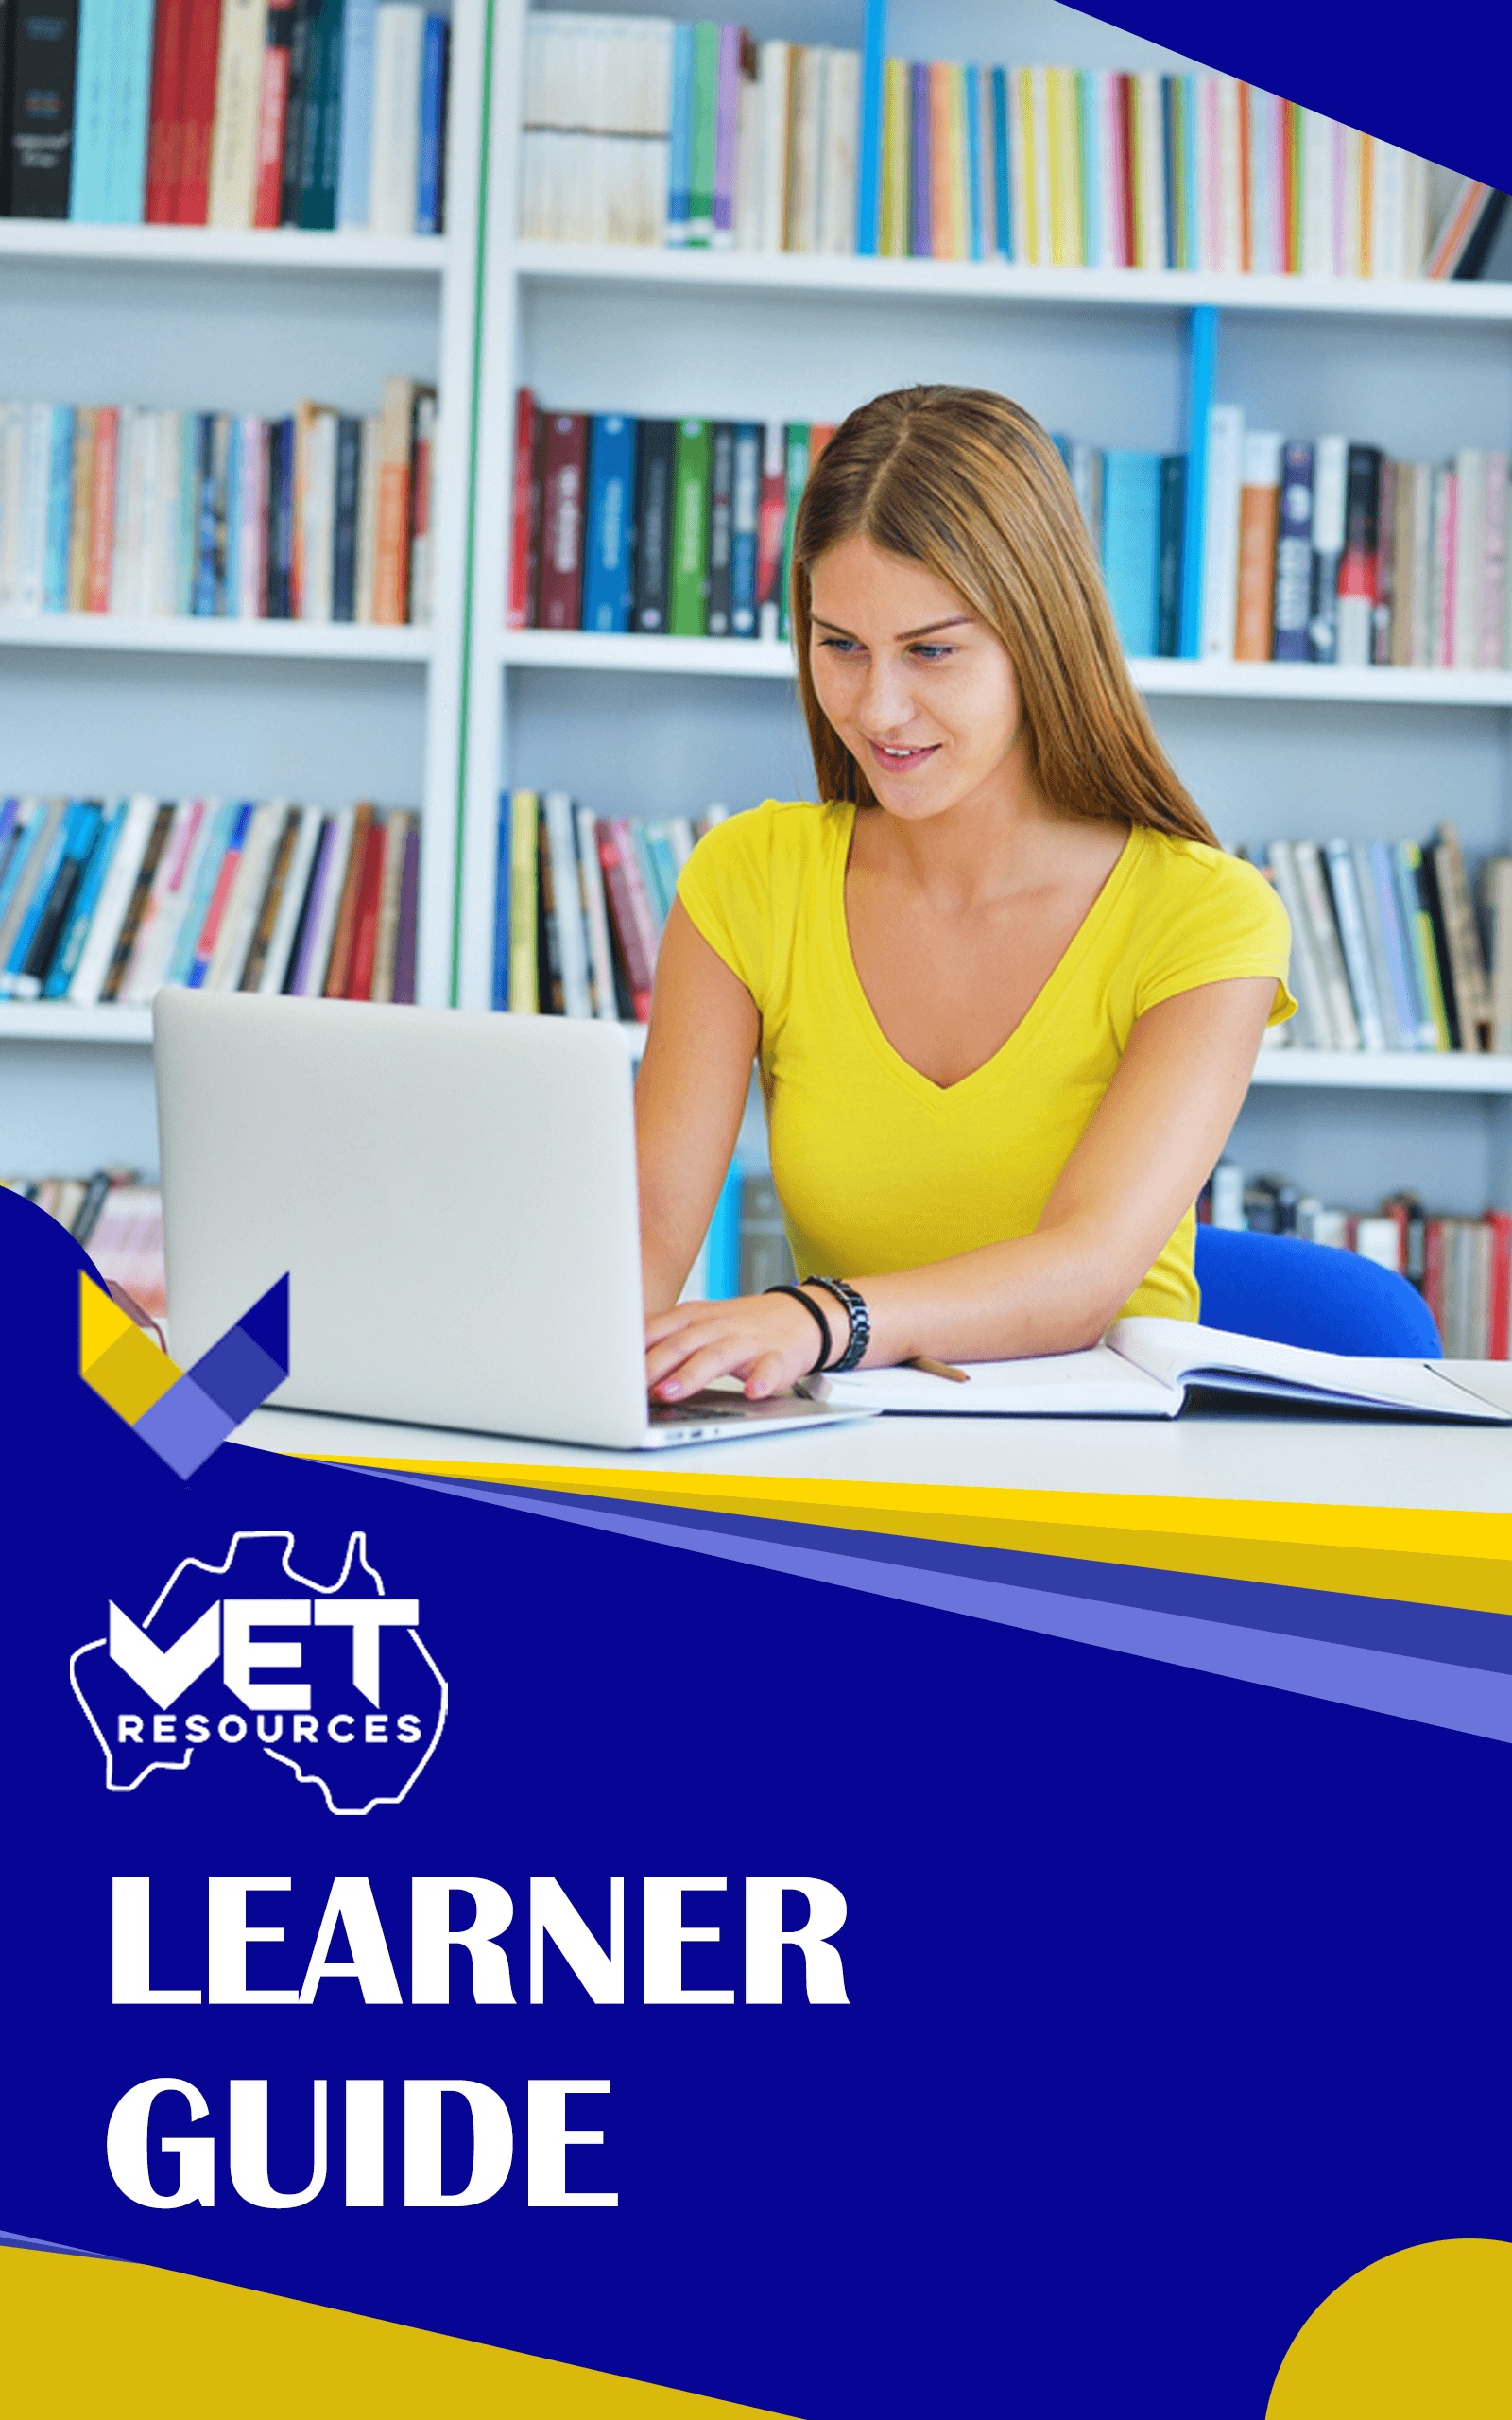 Learner Guide - SITEEVT031 - Determine event feasibility